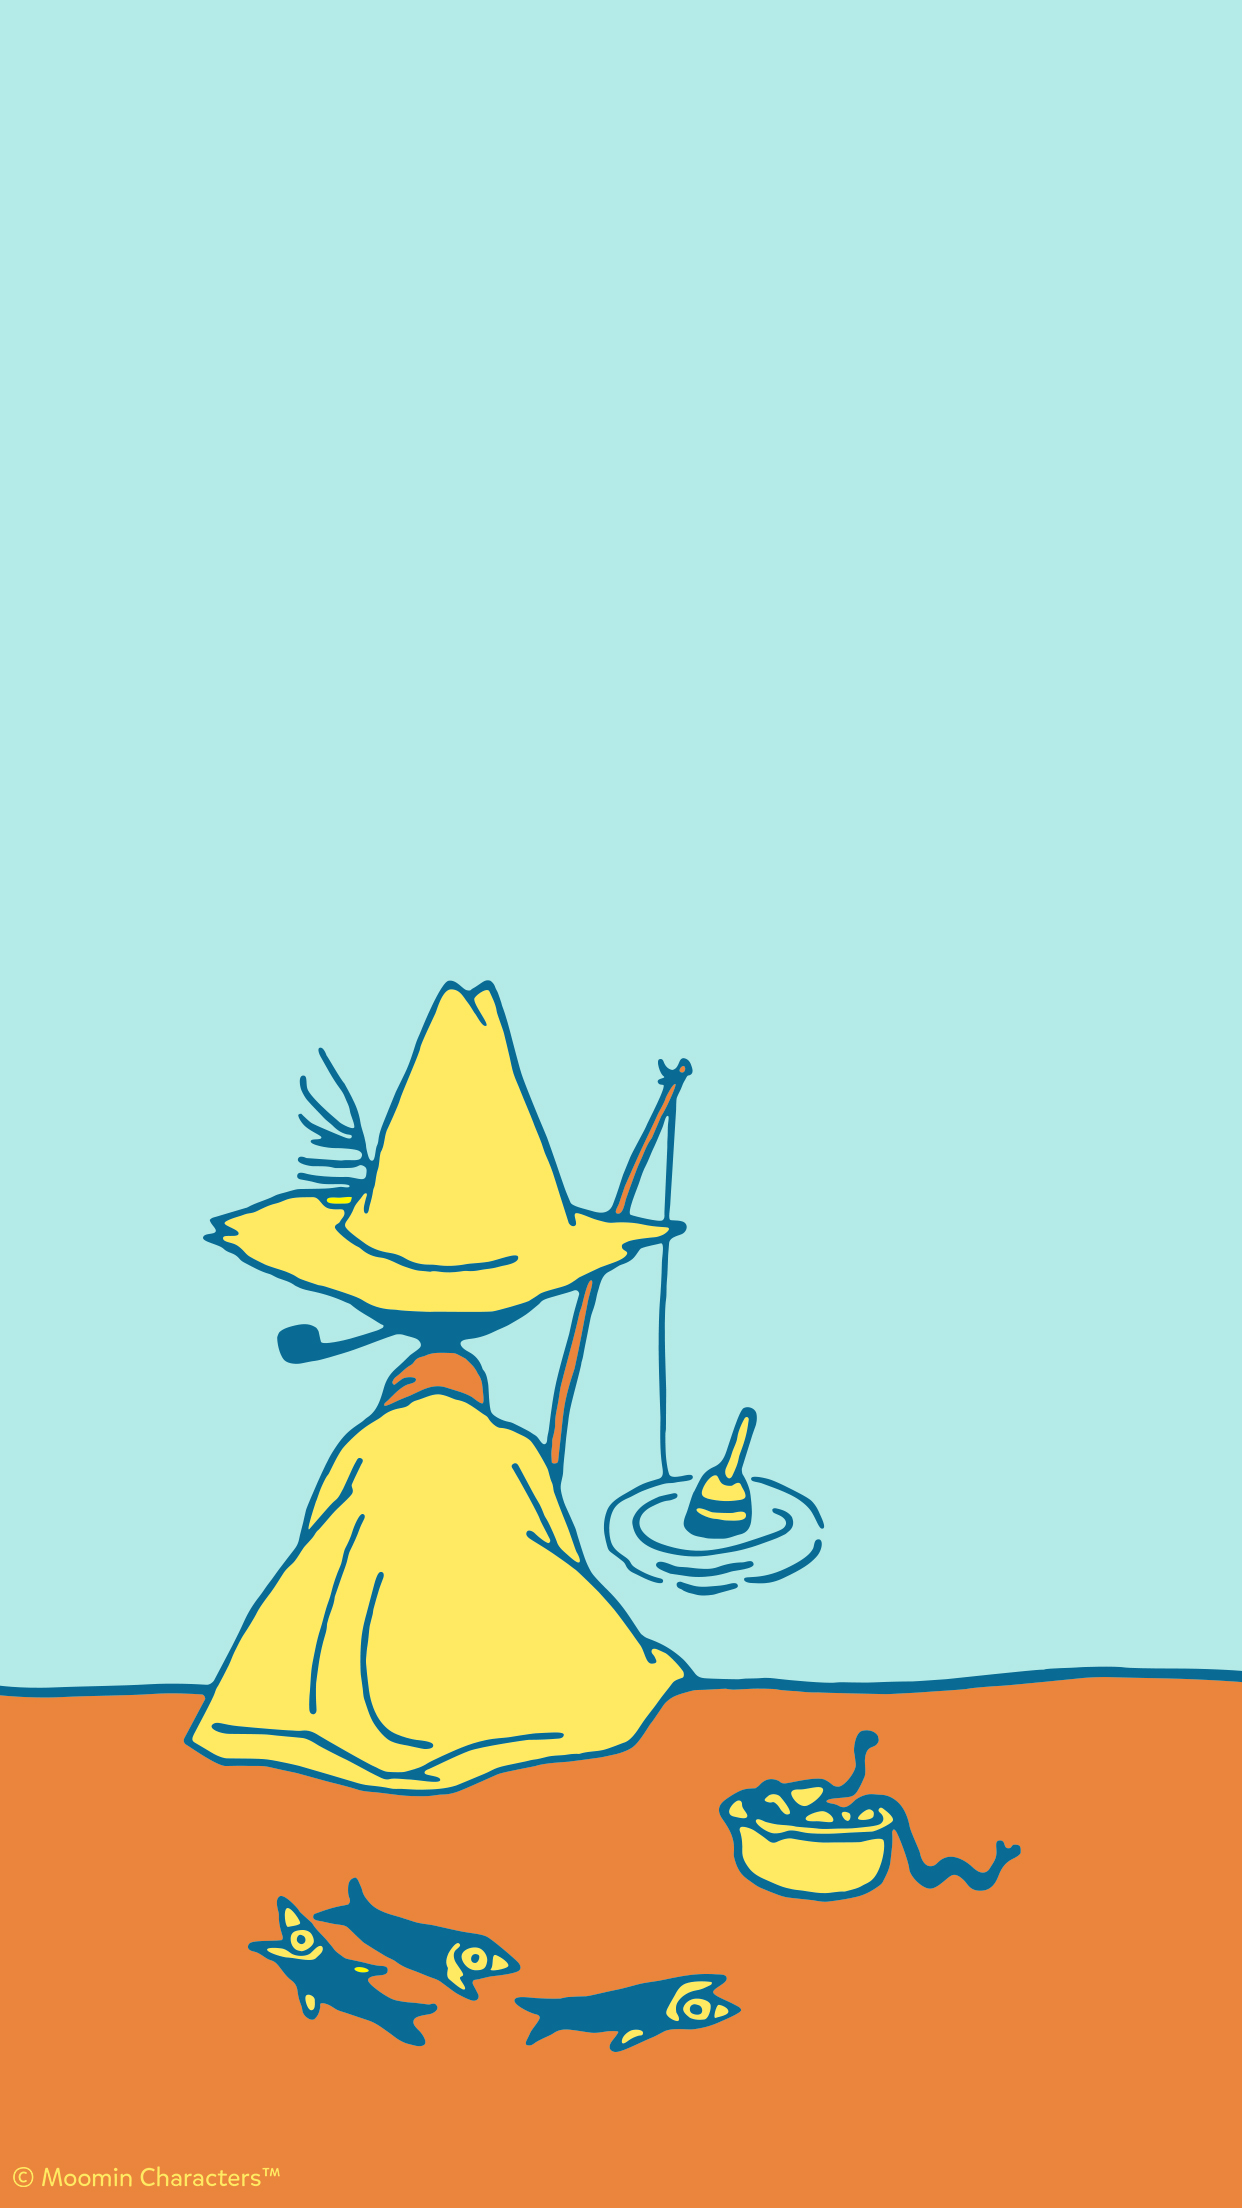 Show Your Support For Oursea With Free Moomin Wallpapers